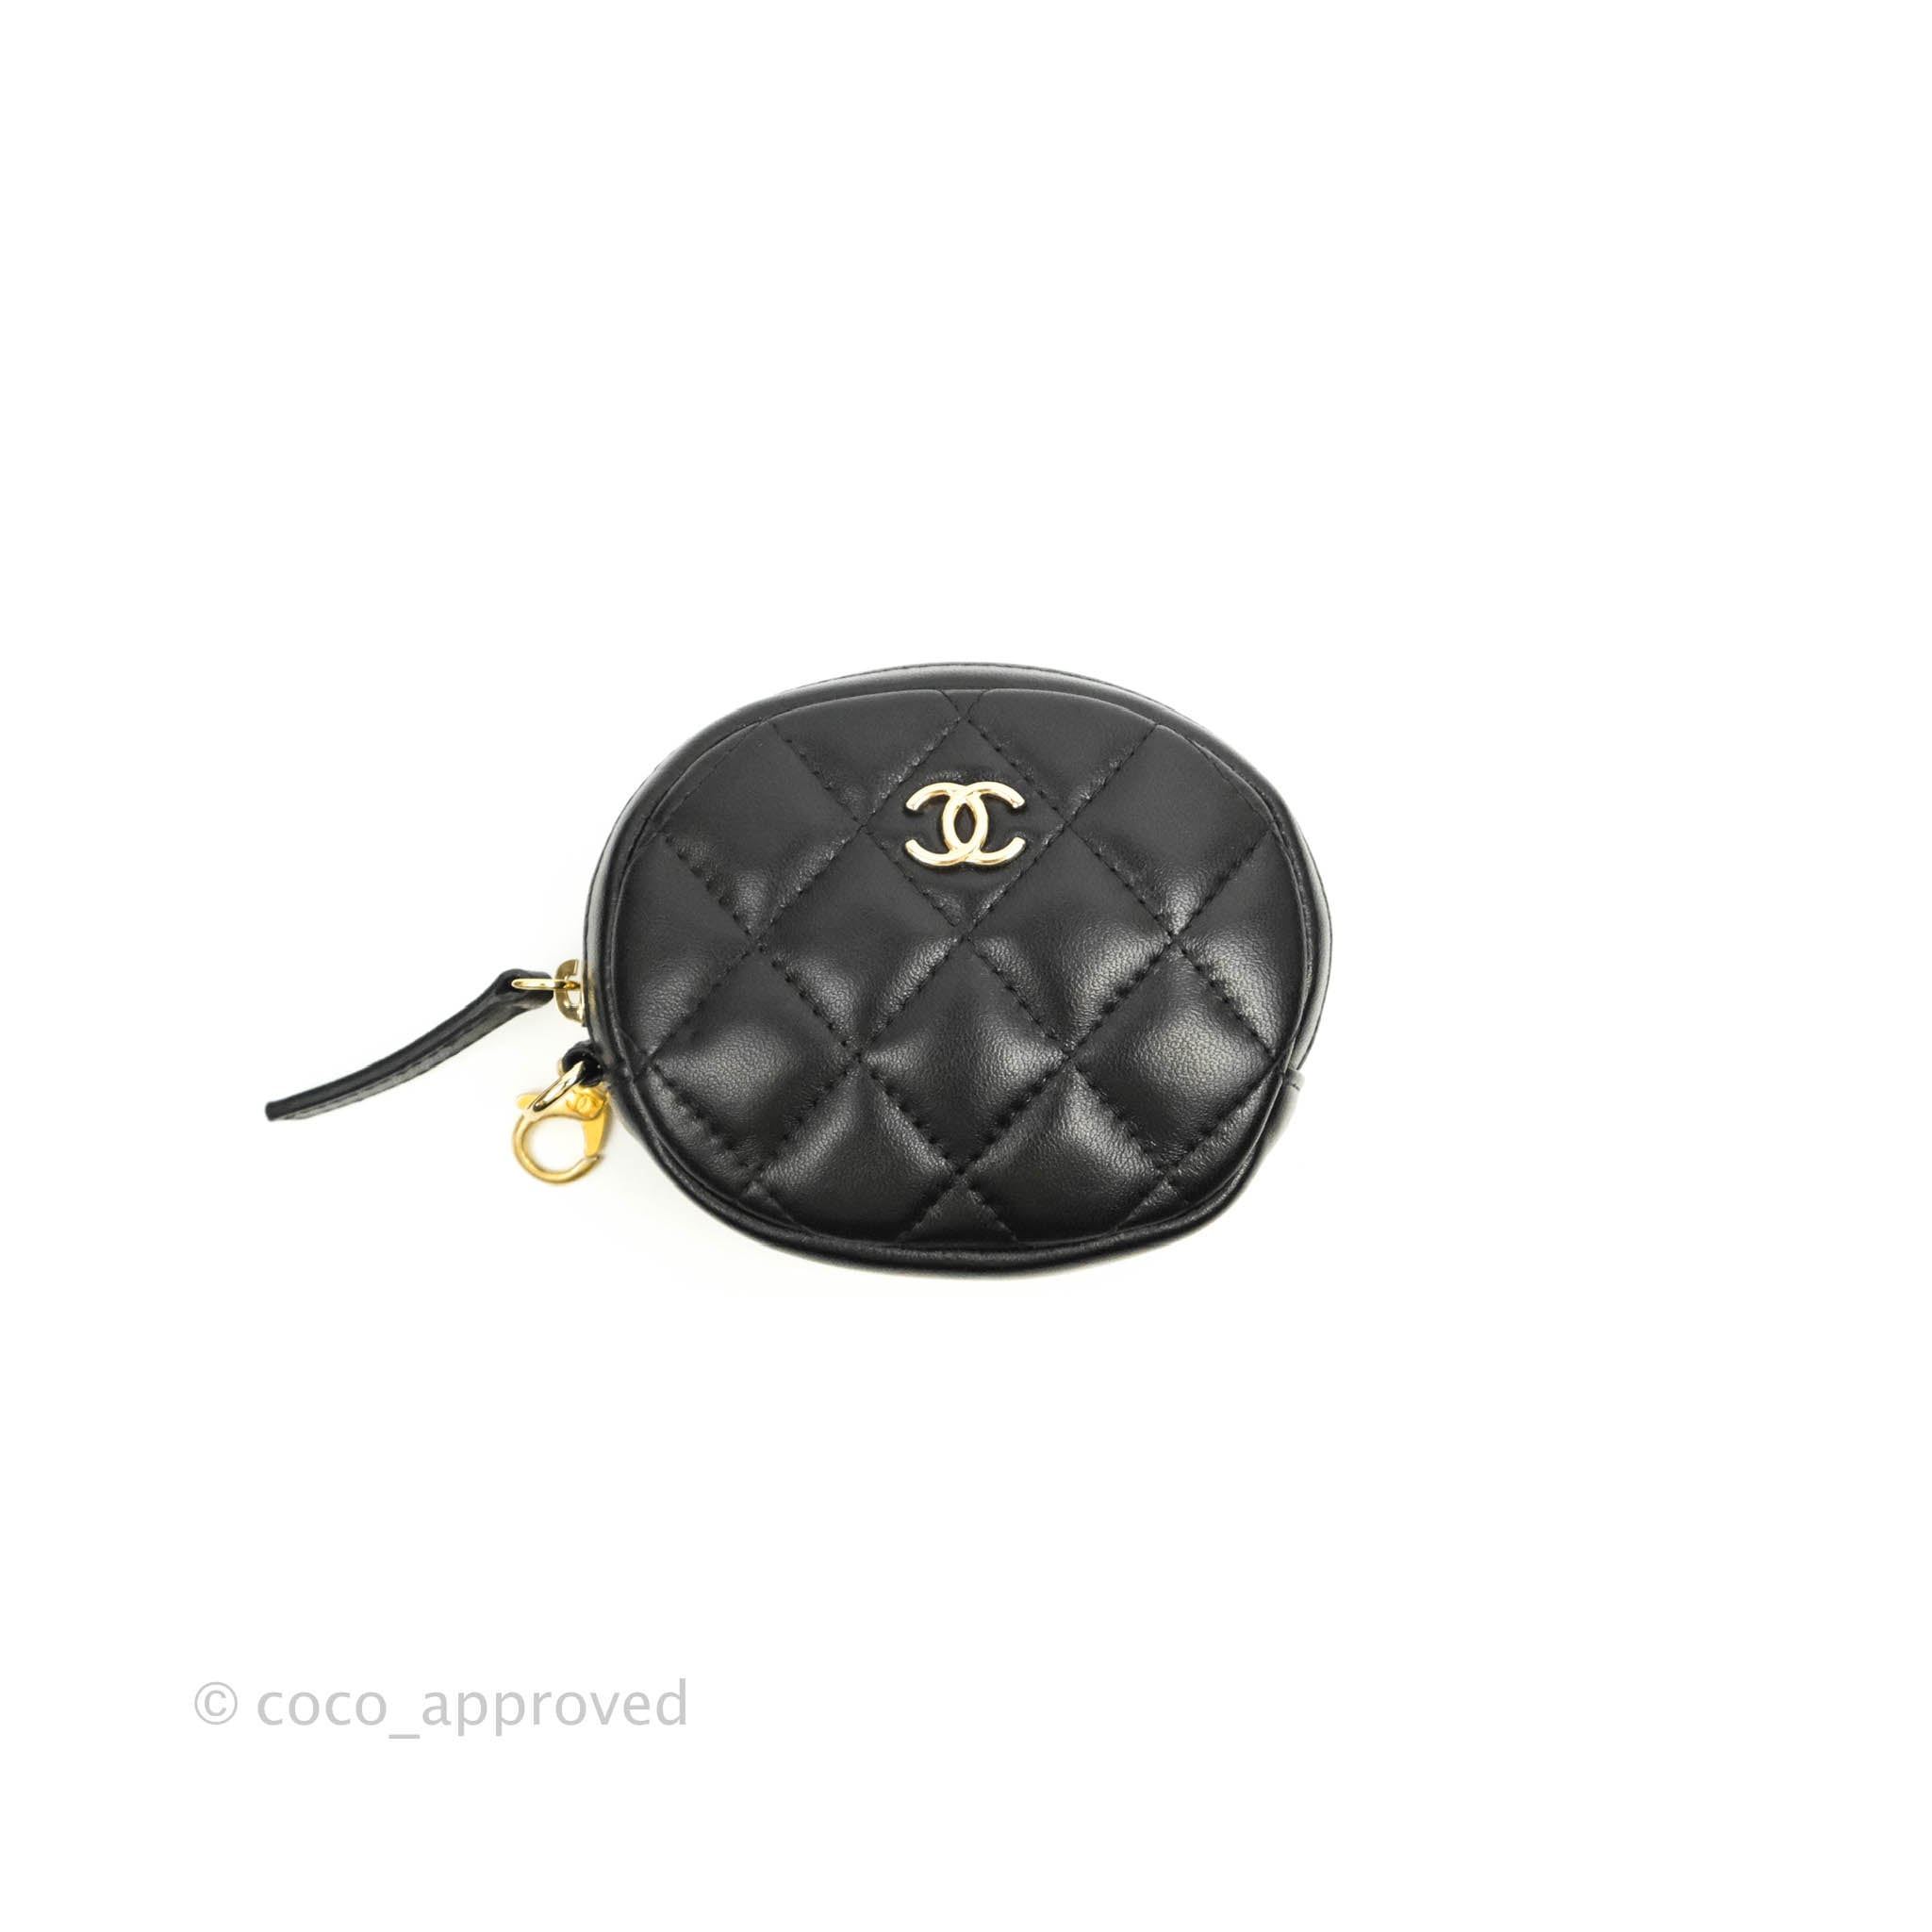 Chanel 19 Wallet On Chain WOC Houndstooth Beige Black Tweed Gold